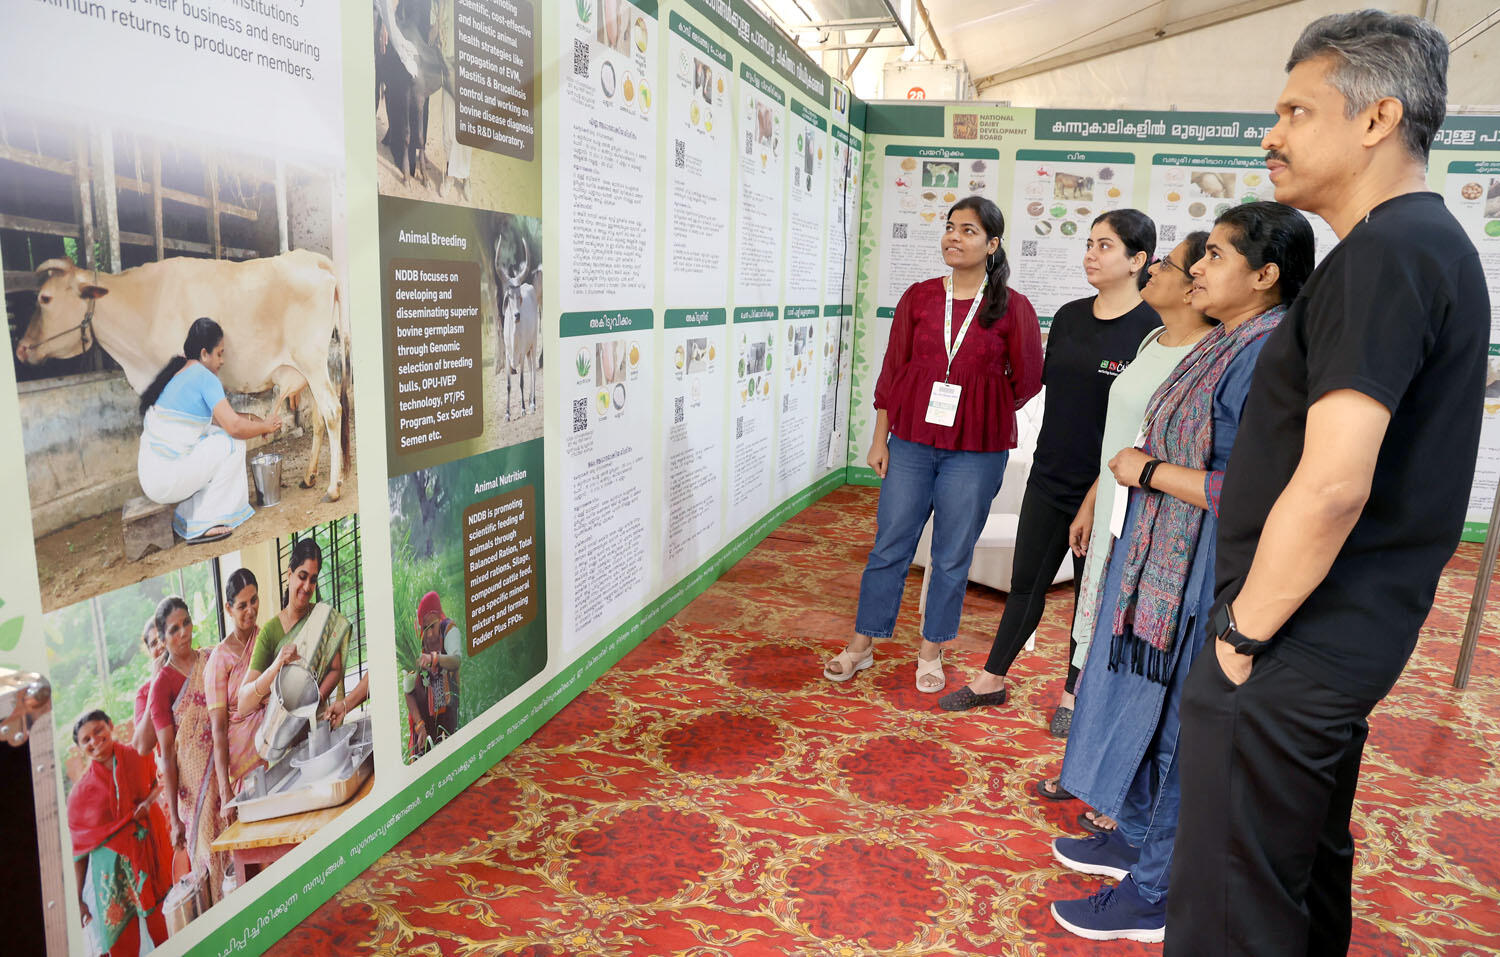 NDDB stall at GAF highlights efficacy of ethno-veterinary practices